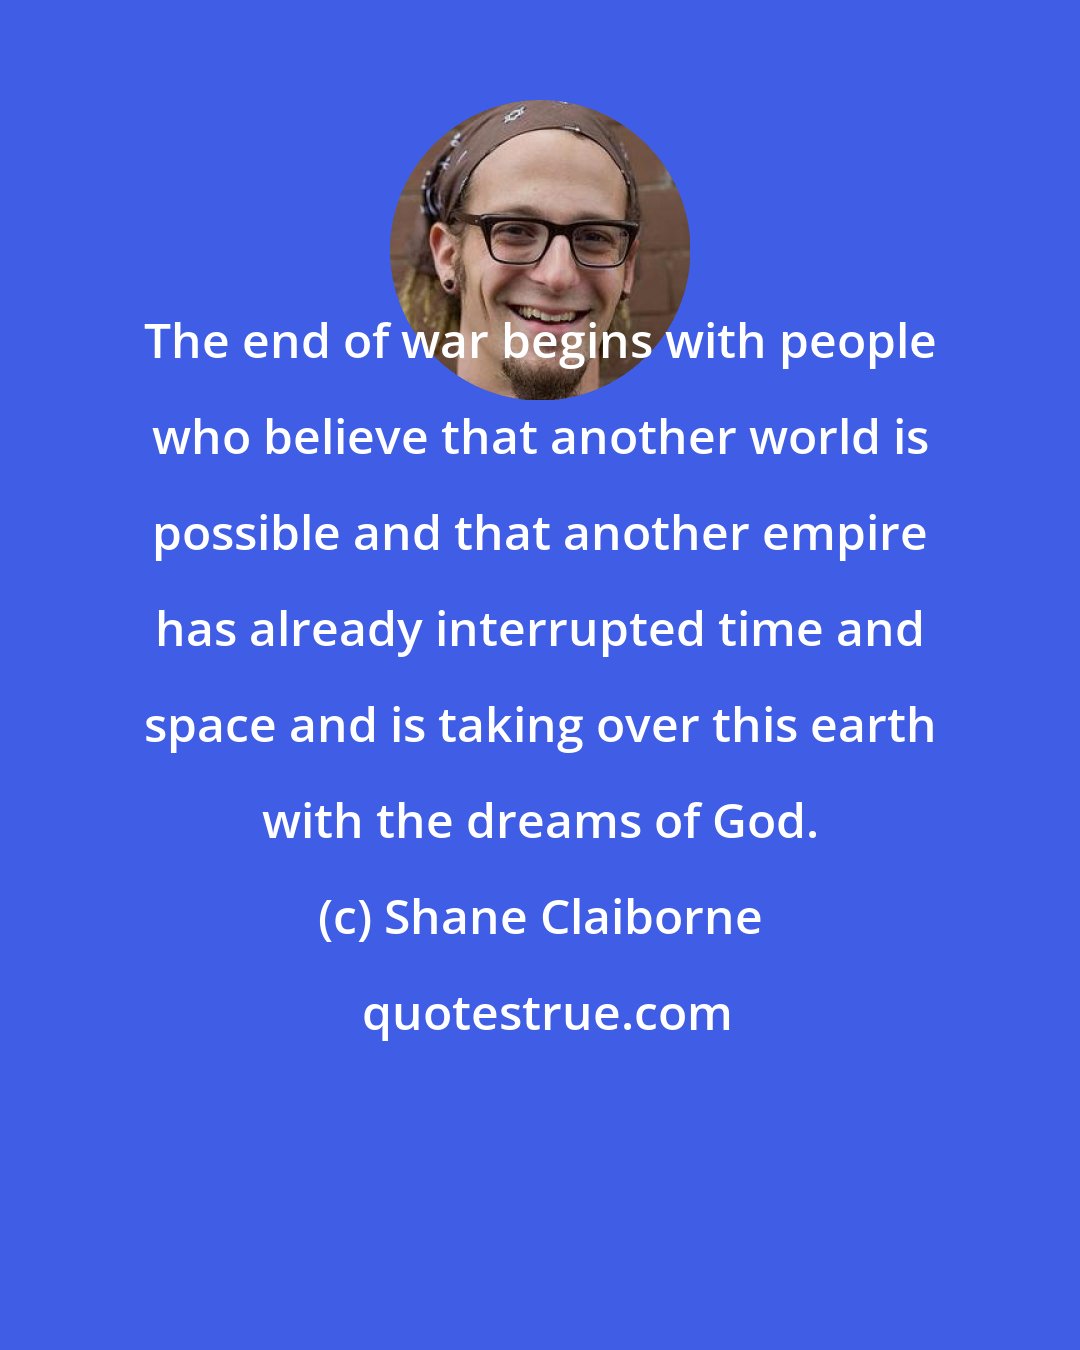 Shane Claiborne: The end of war begins with people who believe that another world is possible and that another empire has already interrupted time and space and is taking over this earth with the dreams of God.